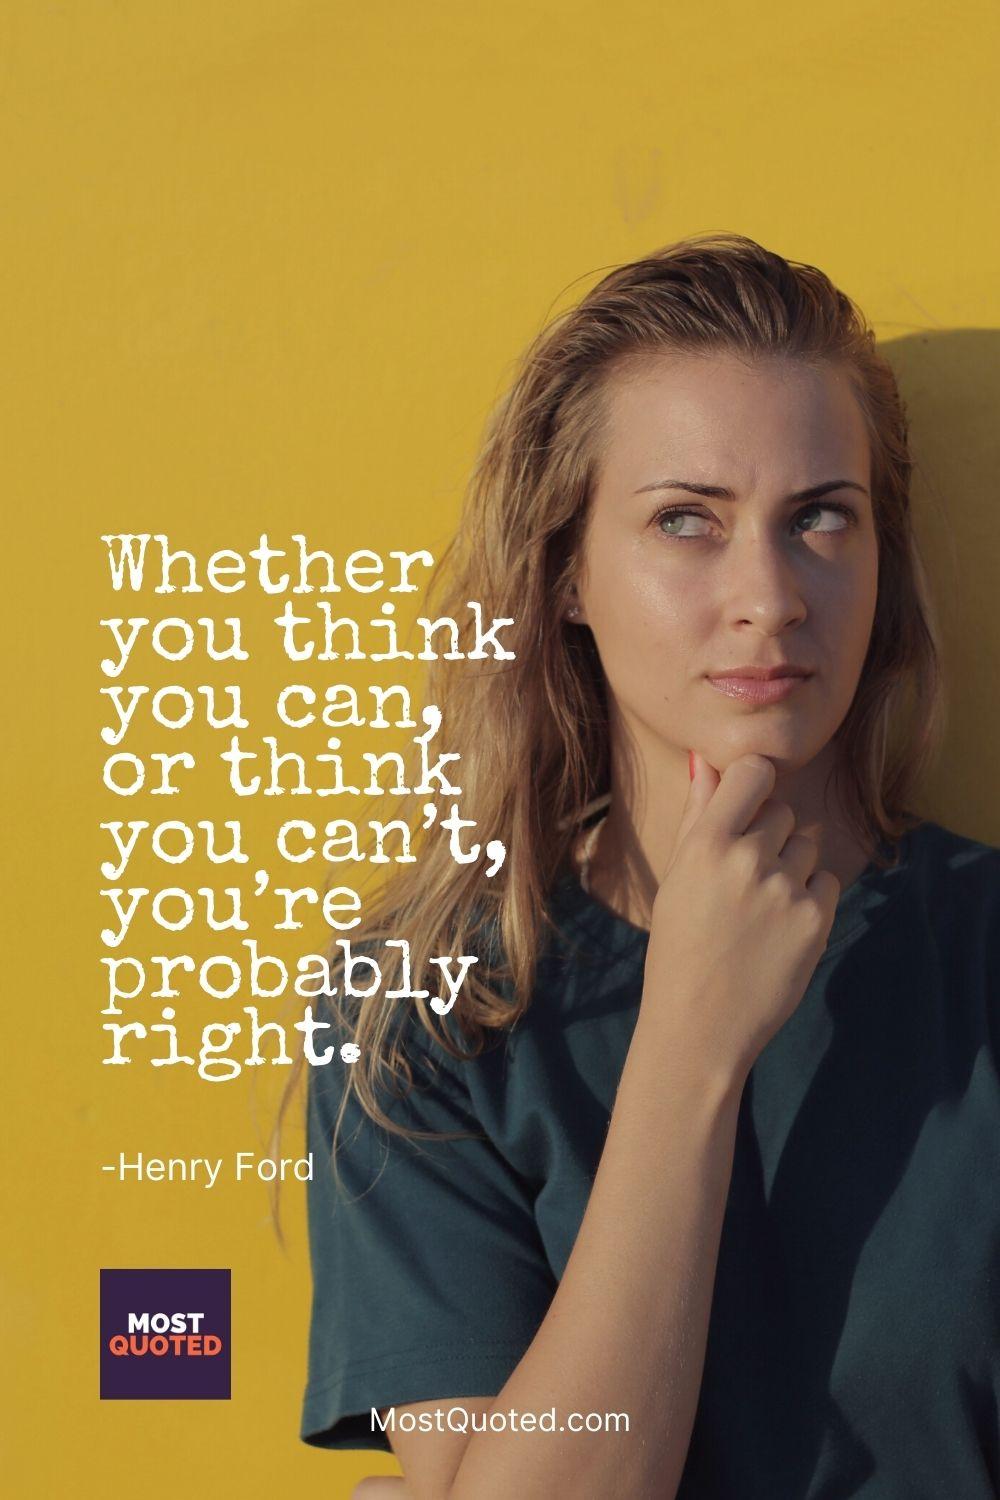 Whether you think you can, or think you can’t, you’re probably right. - Henry Ford